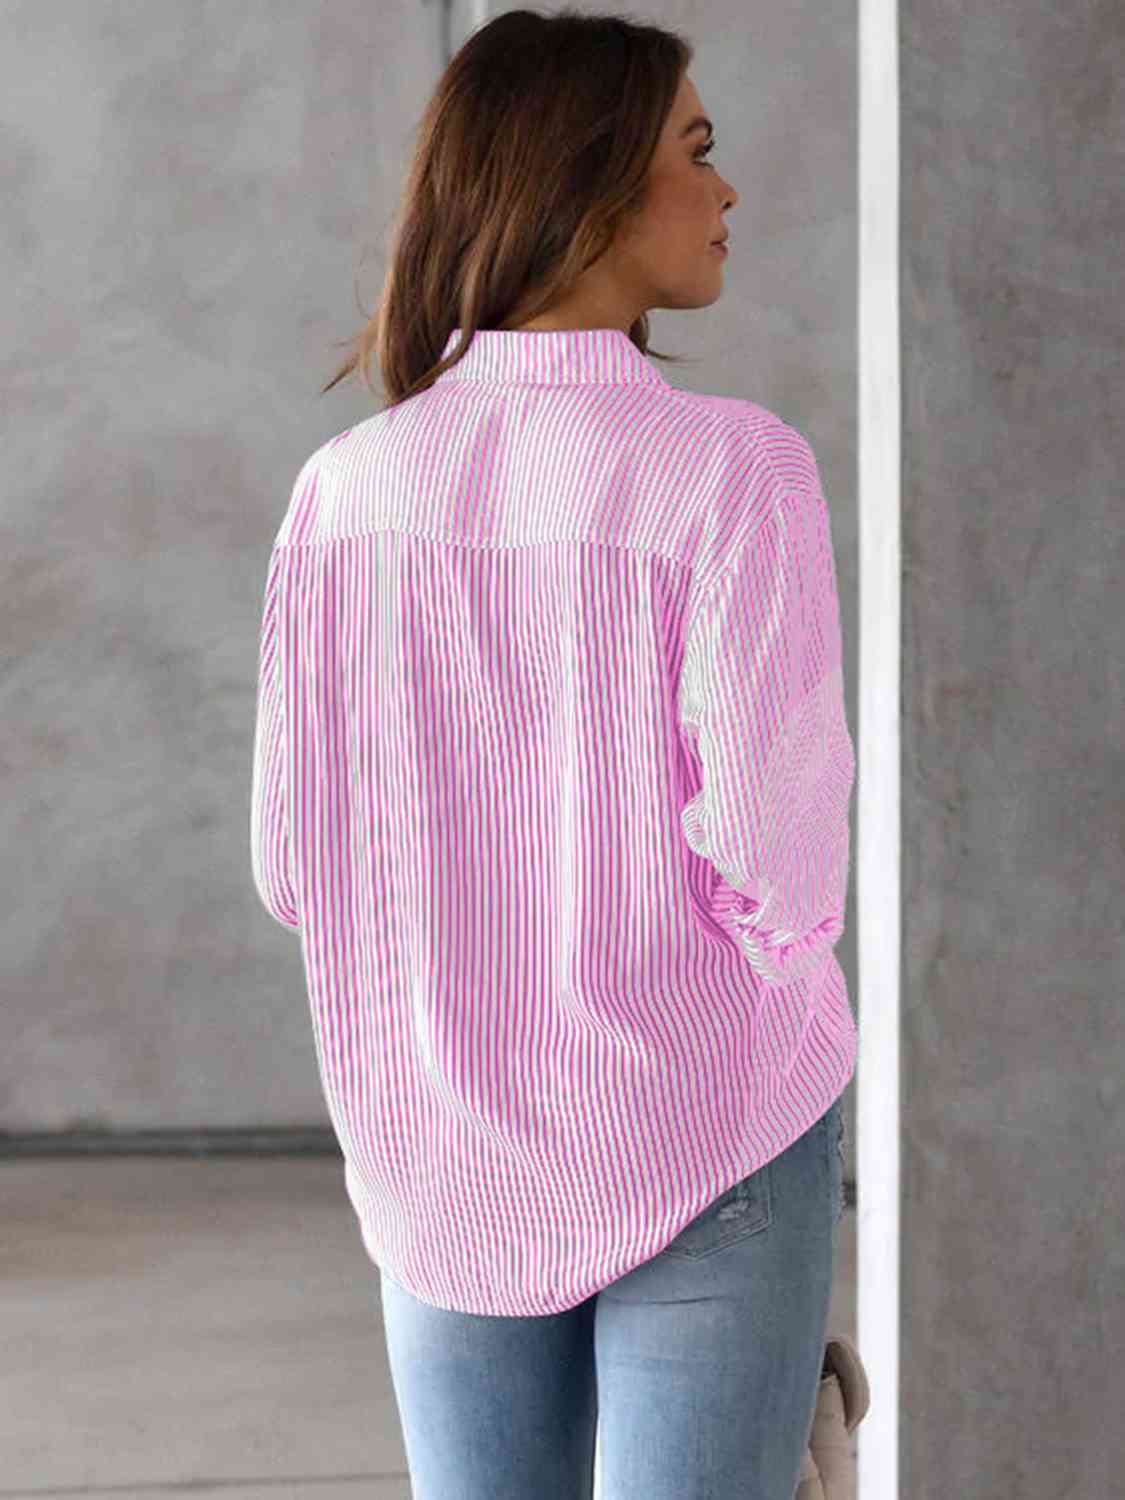 Striped Collared Neck Shirt with Pocket